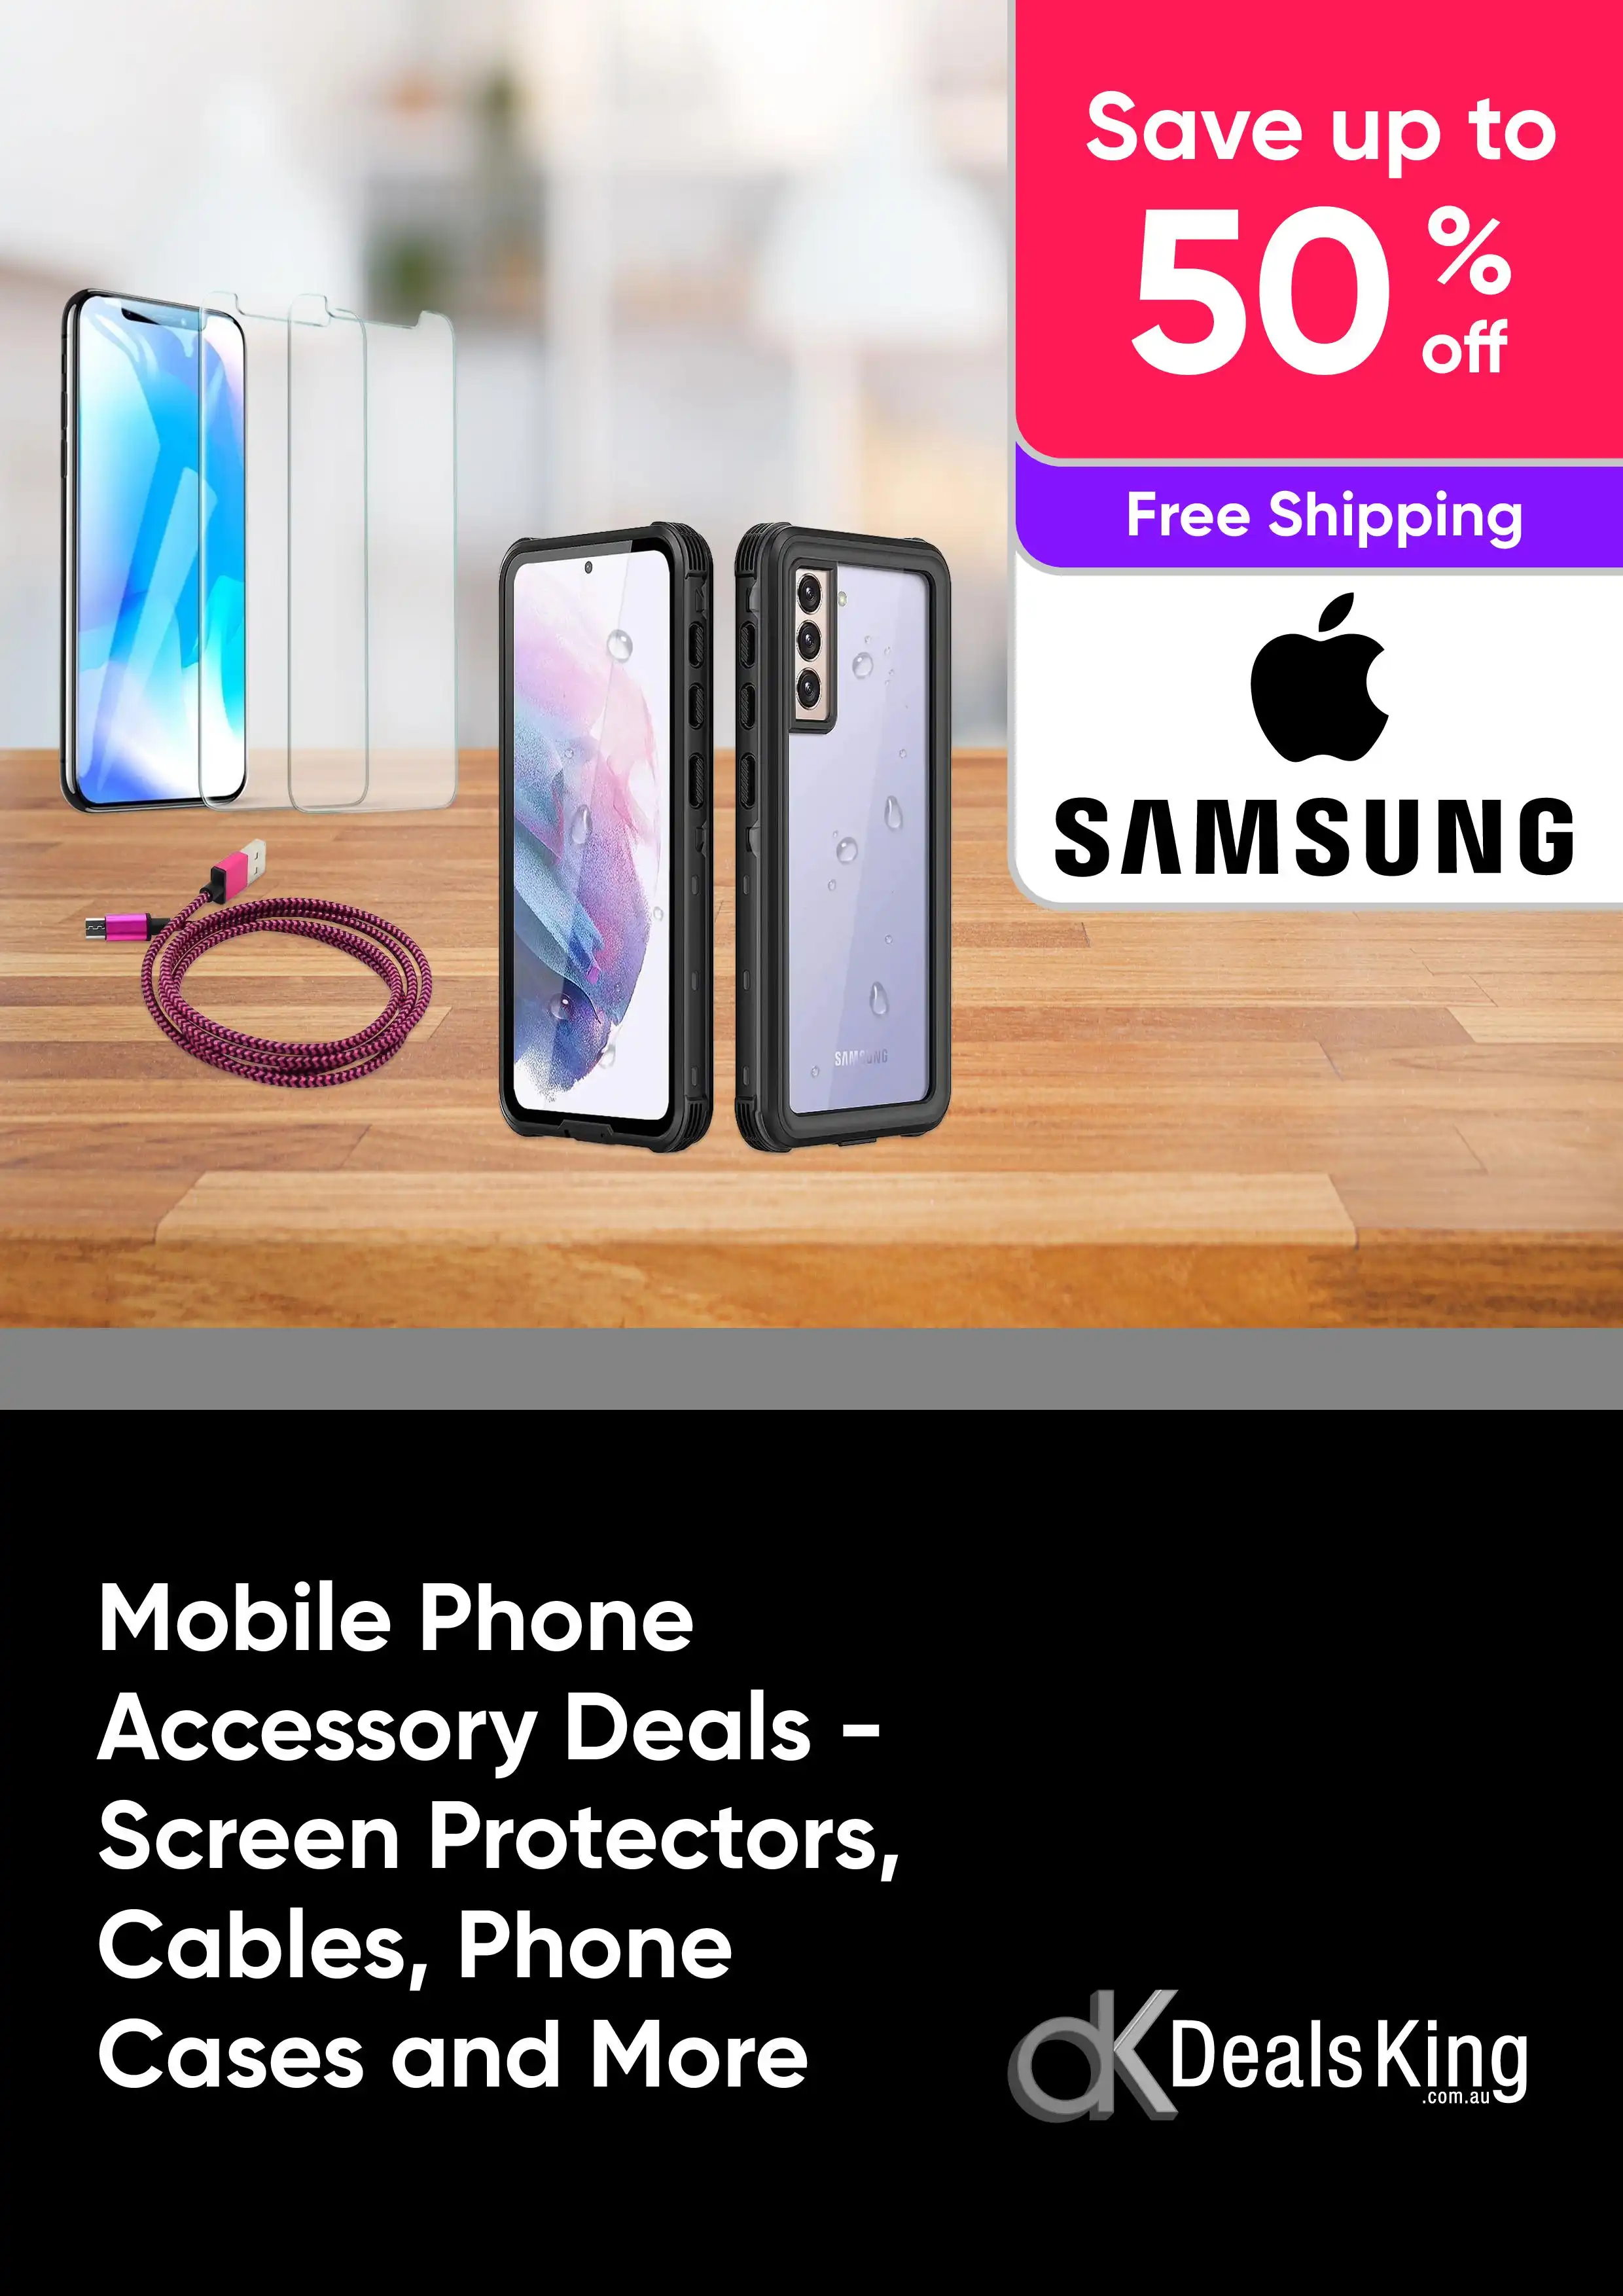 Mobile Phone Accessory Deals - Up To 50% Off Screen Protectors, Cables, Phone Cases and More